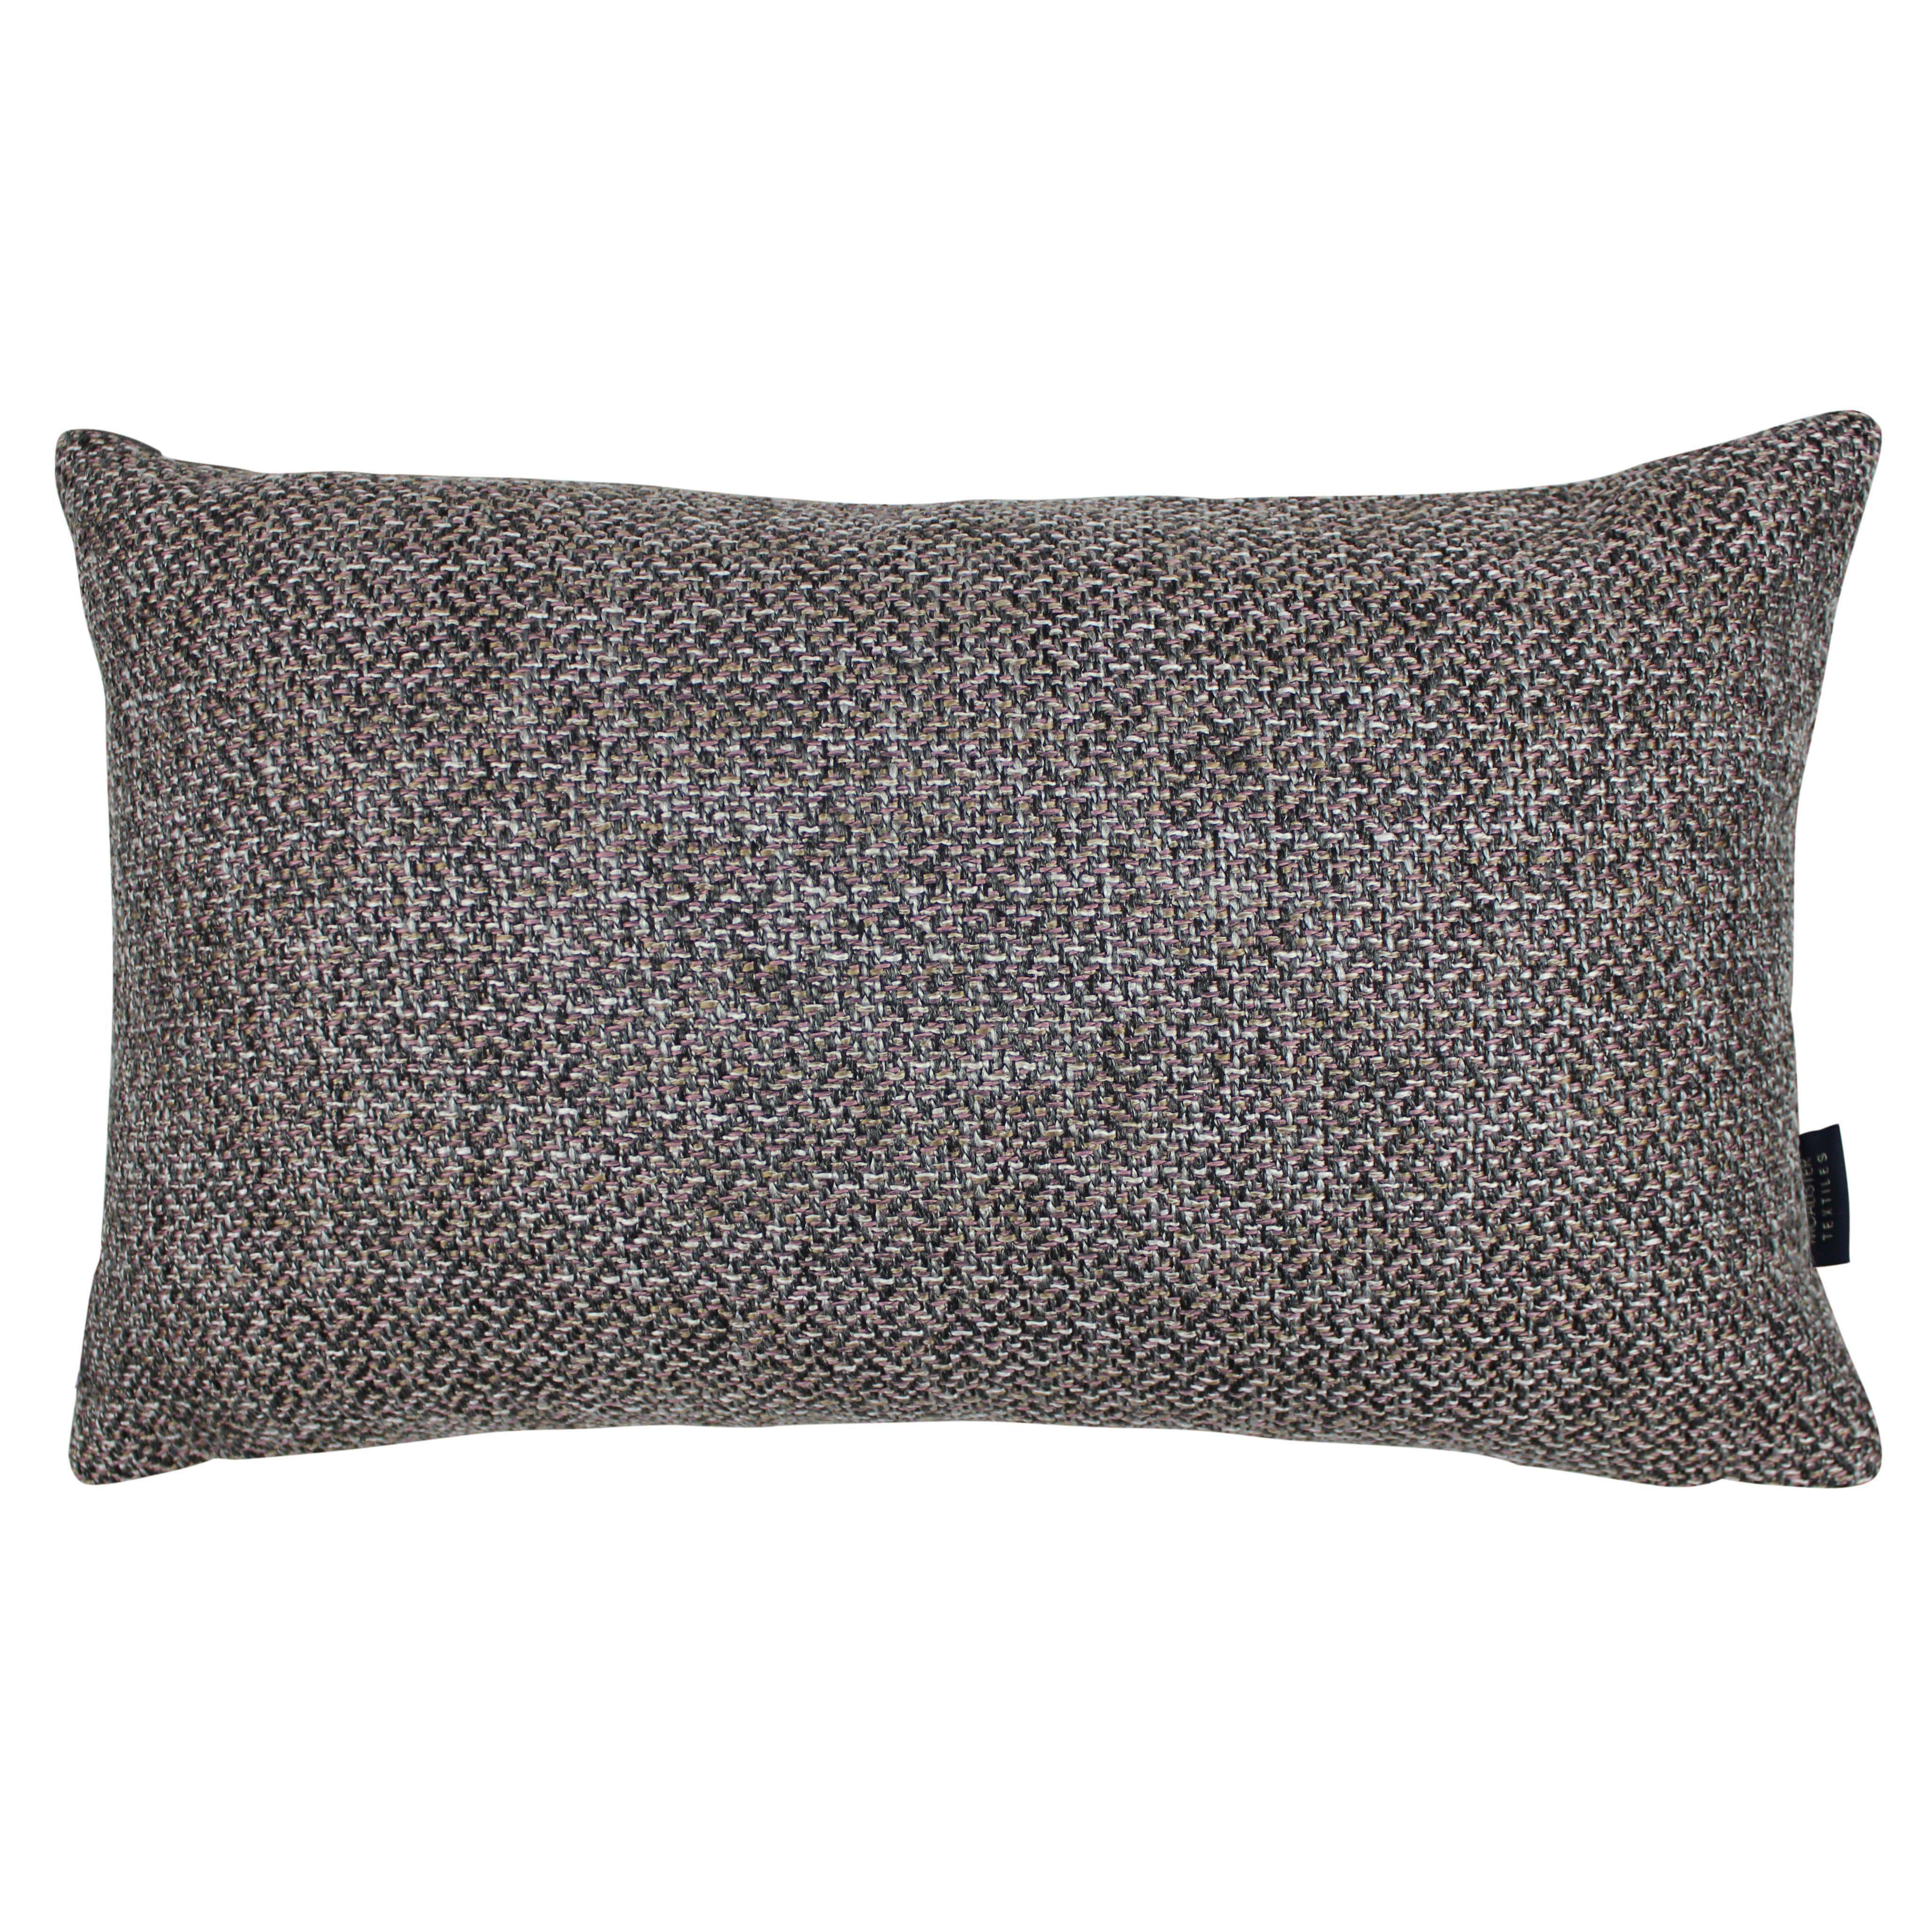 McAlister Textiles Lewis Tweed Pillow Grey Heather and Charcoal Pillow Cover Only 50cm x 30cm 